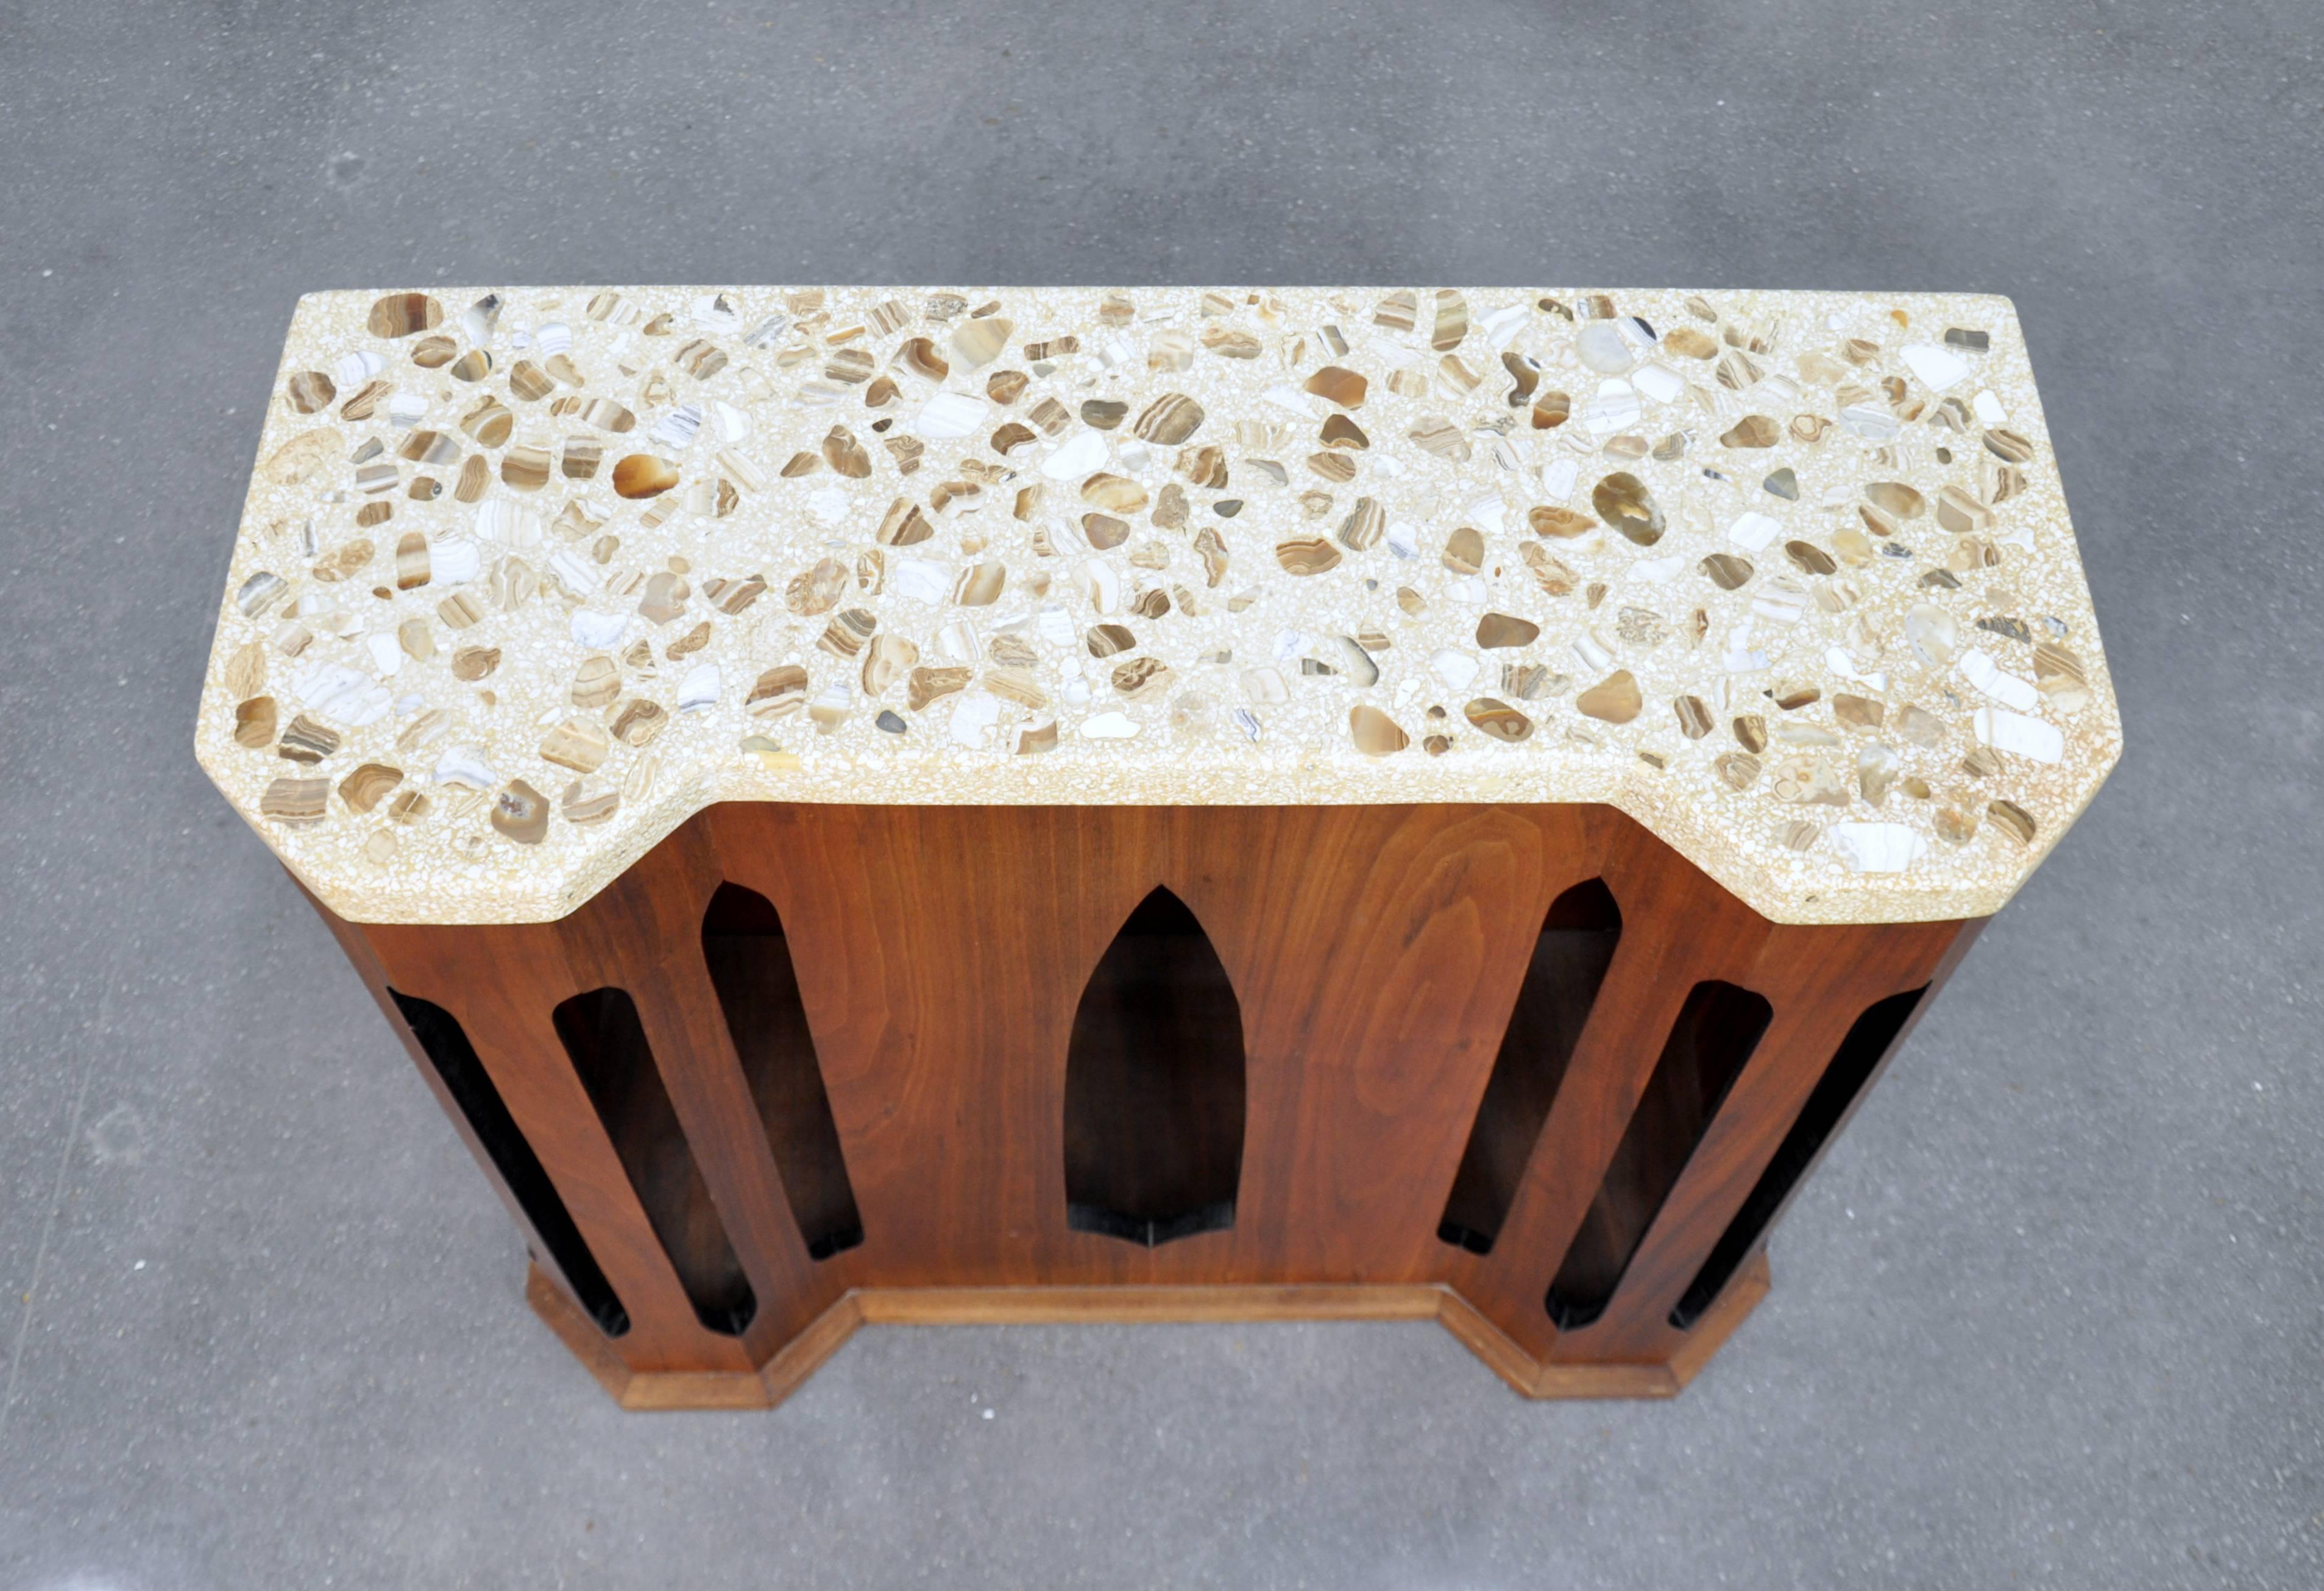 A rare Mid-Century Modern console, foyer or entry table designed by Harvey Probber, dating from the early 1960s. It features a shaped terrazzo top inlaid with onyx and marble chips over a sculptural walnut base of Moroccan inspiration. The onyx